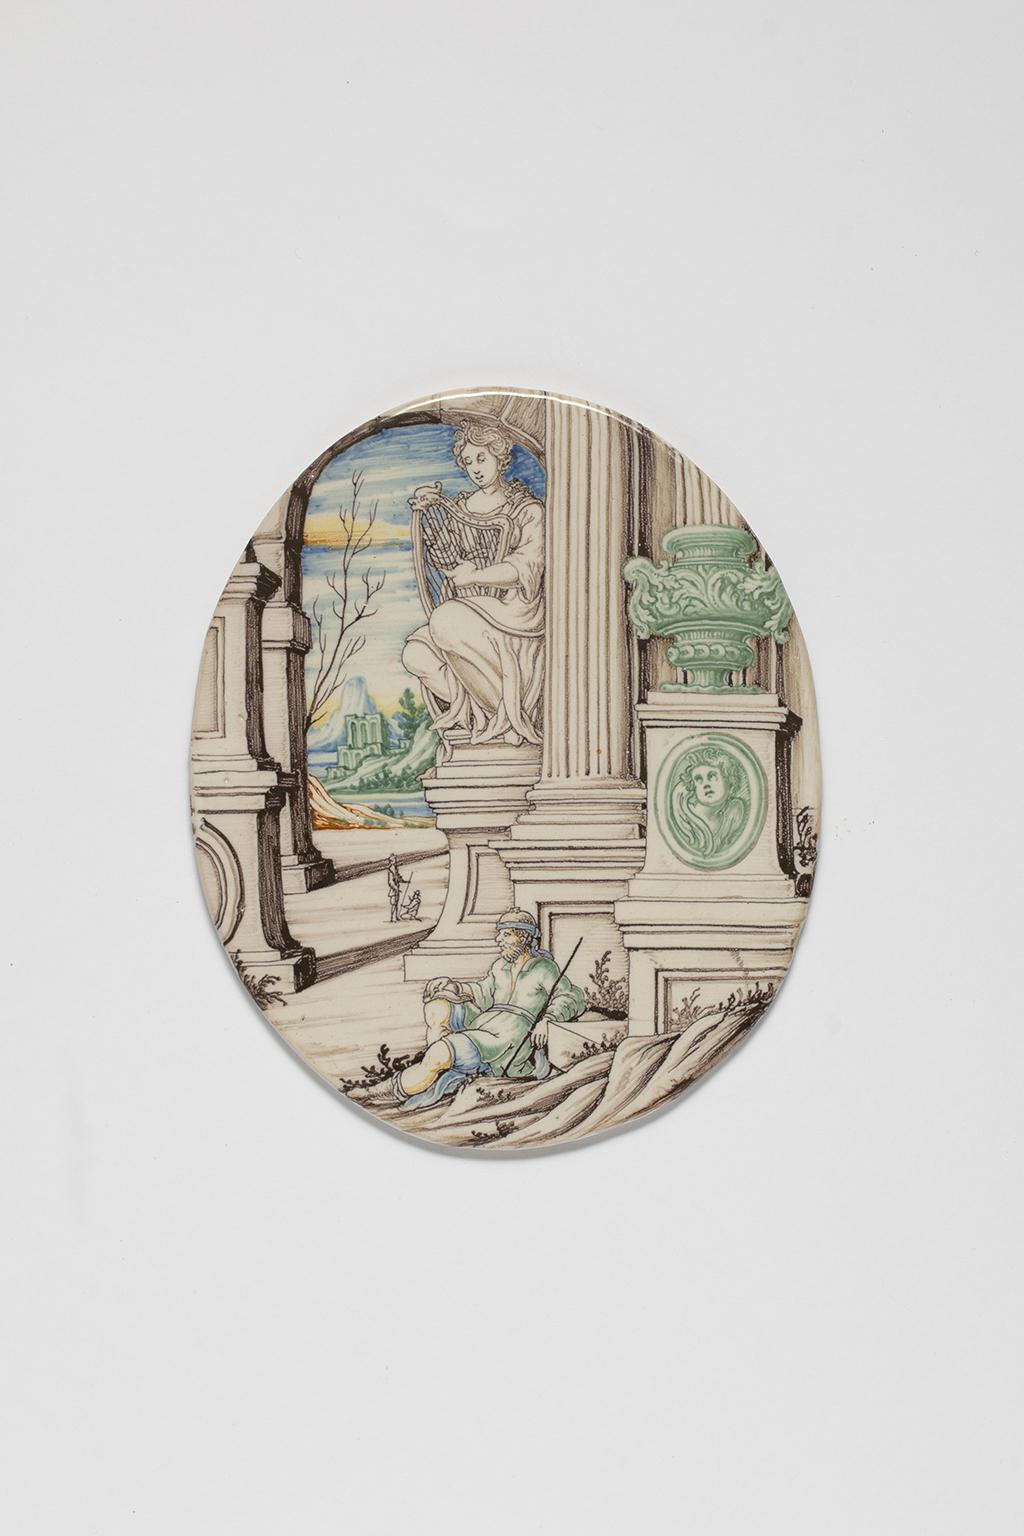 Ancient Maiolica Tiles, Ambrogette, Rampini Manufactory, Pavia, 1693-1704 In Excellent Condition For Sale In Milano, IT